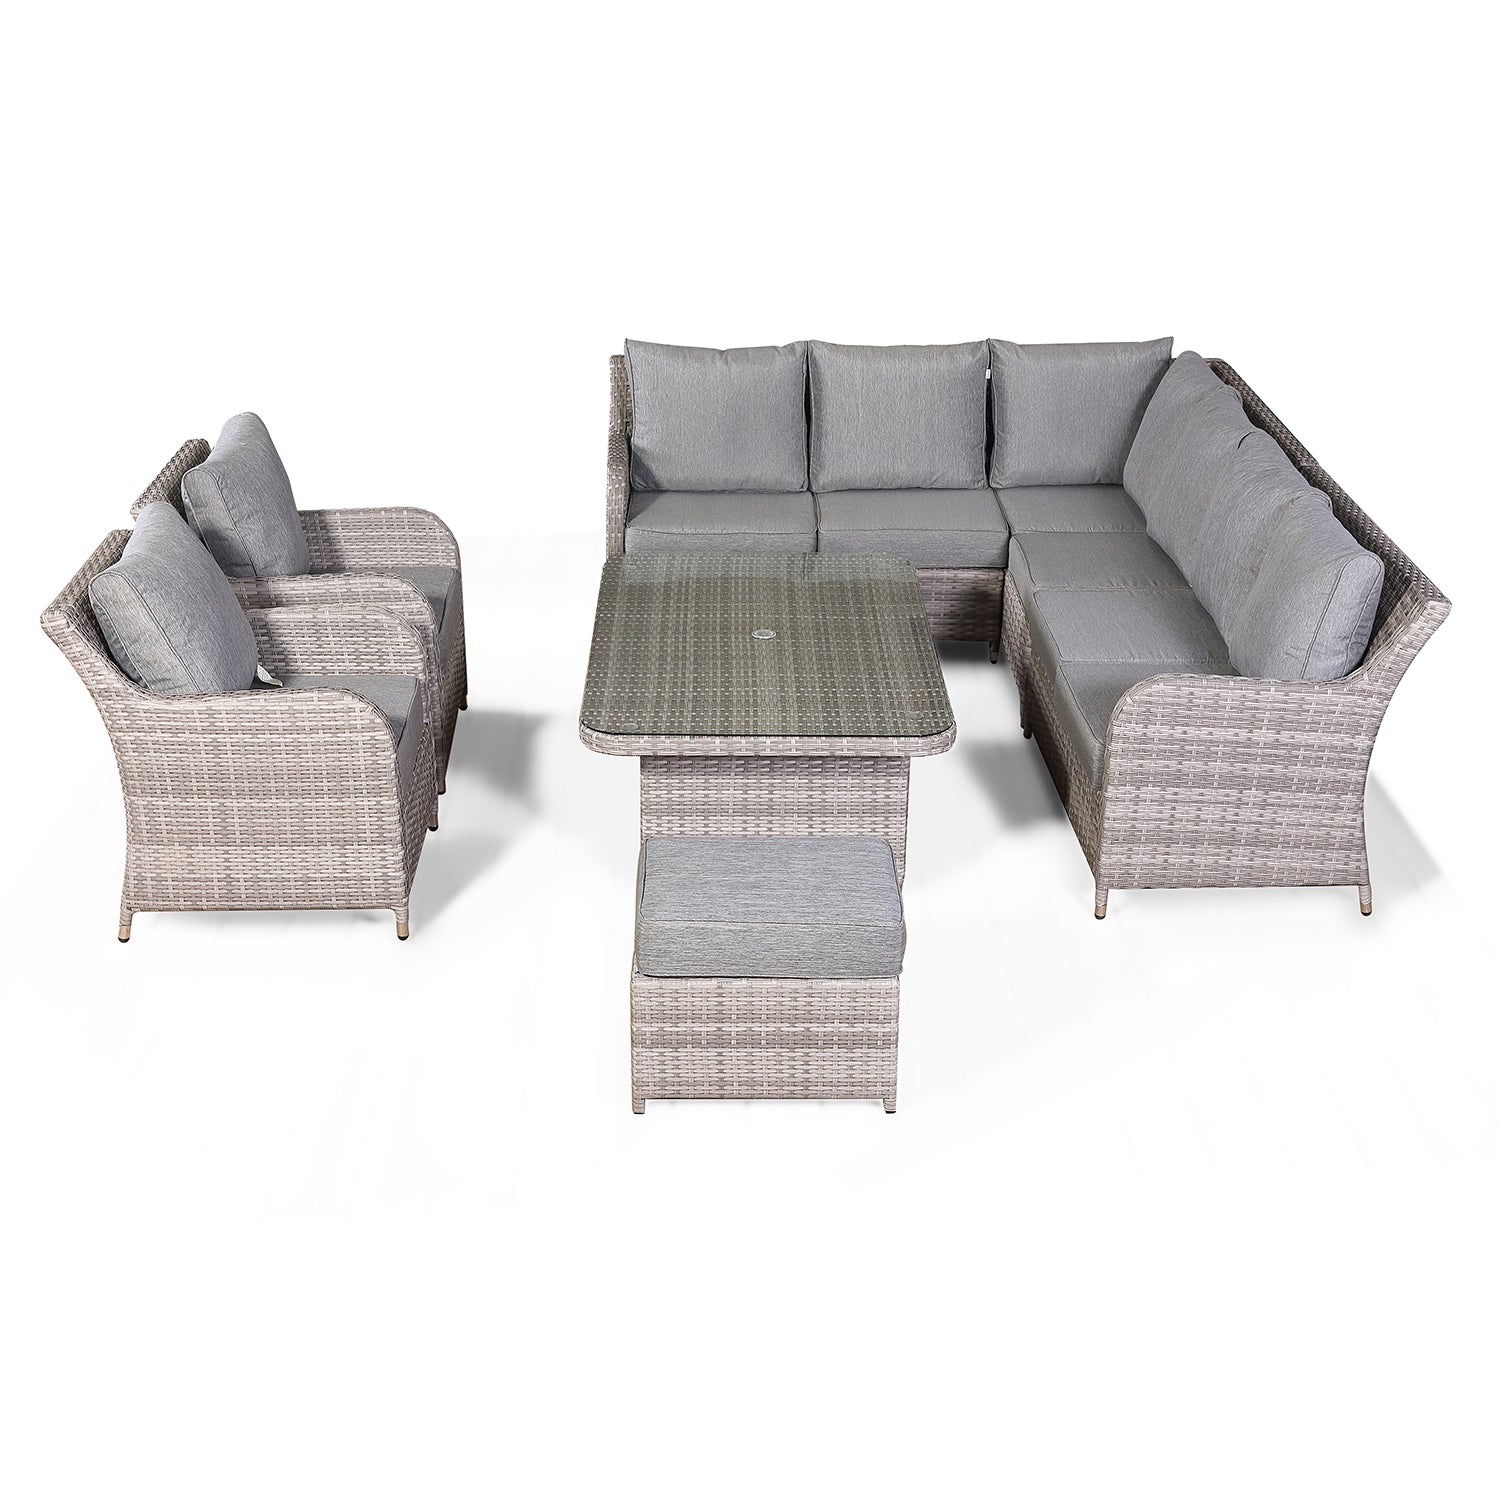 Rattan Park Sicily Aluminium Elite Left Hand Corner Set with Rising Table and Two Chairs in Grey Weave